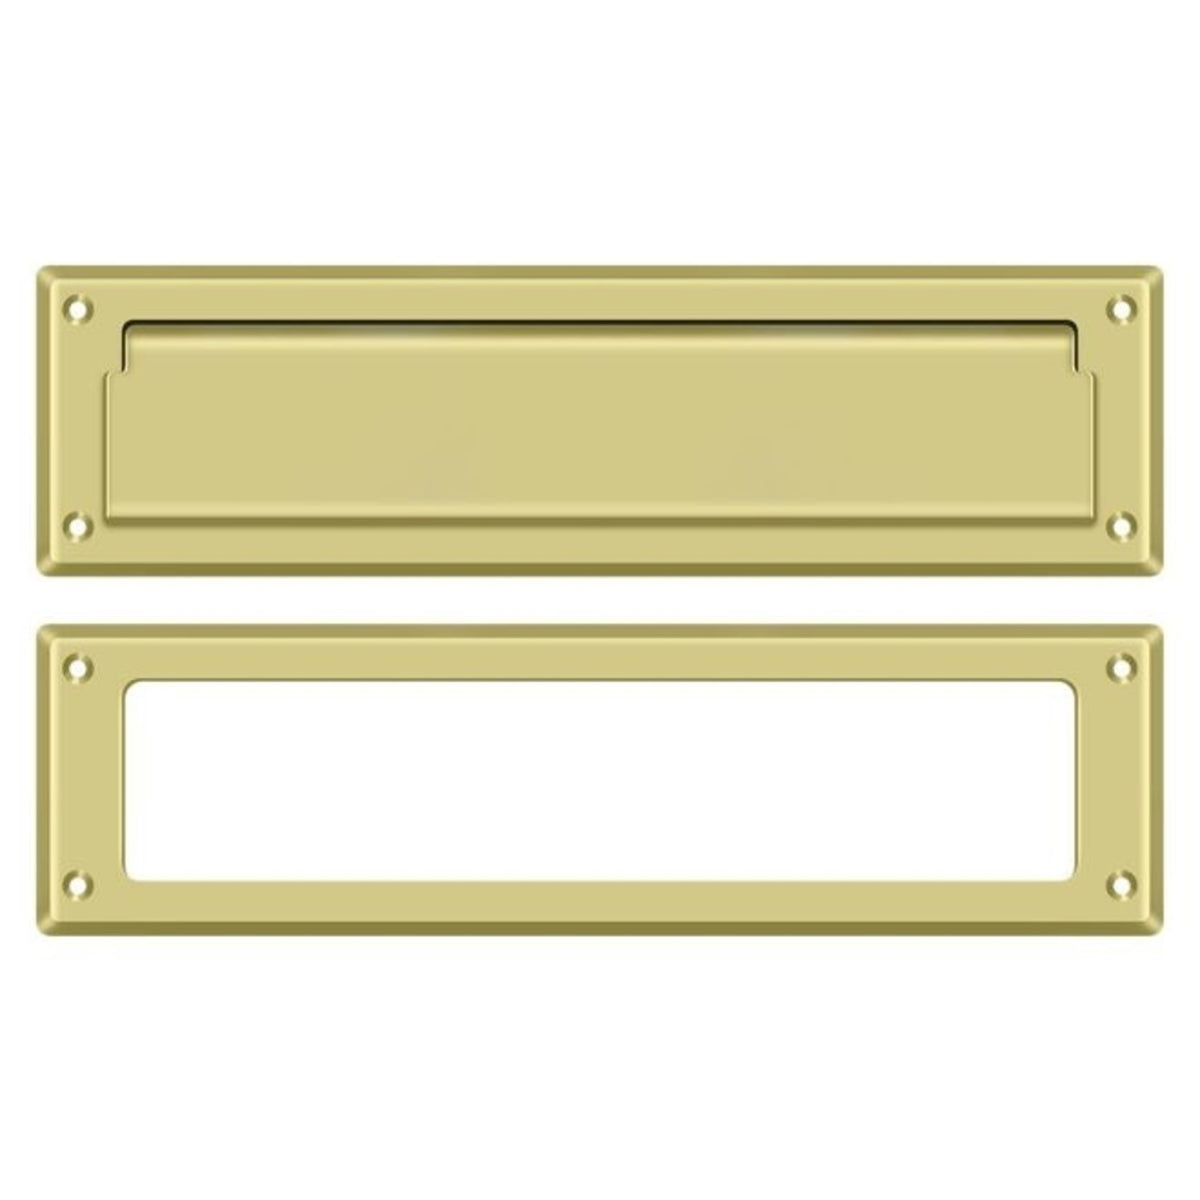 Deltana MS211U3 Mail Slot With Interior Frame, Bright Brass